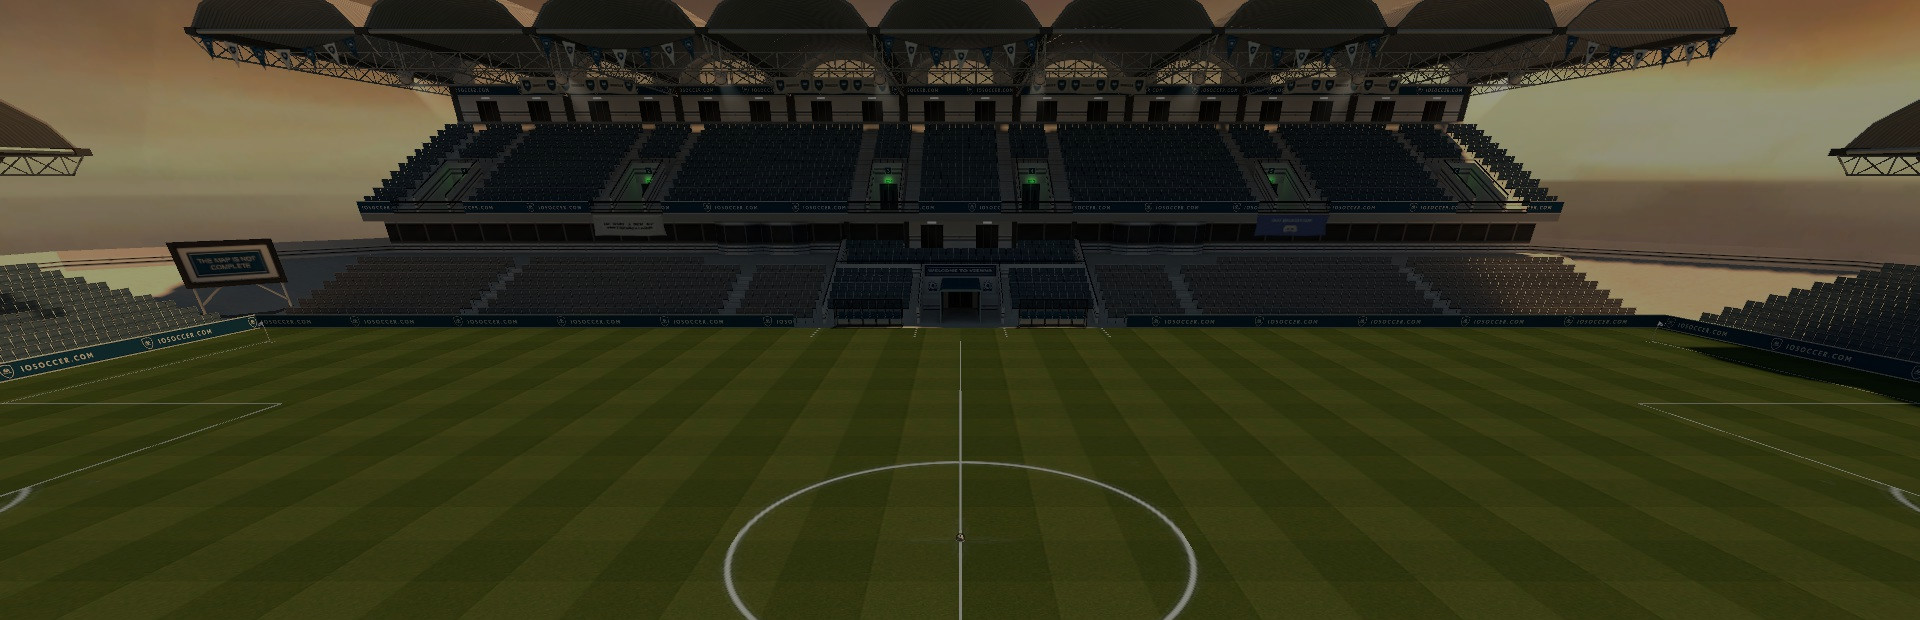 IOSoccer cover image